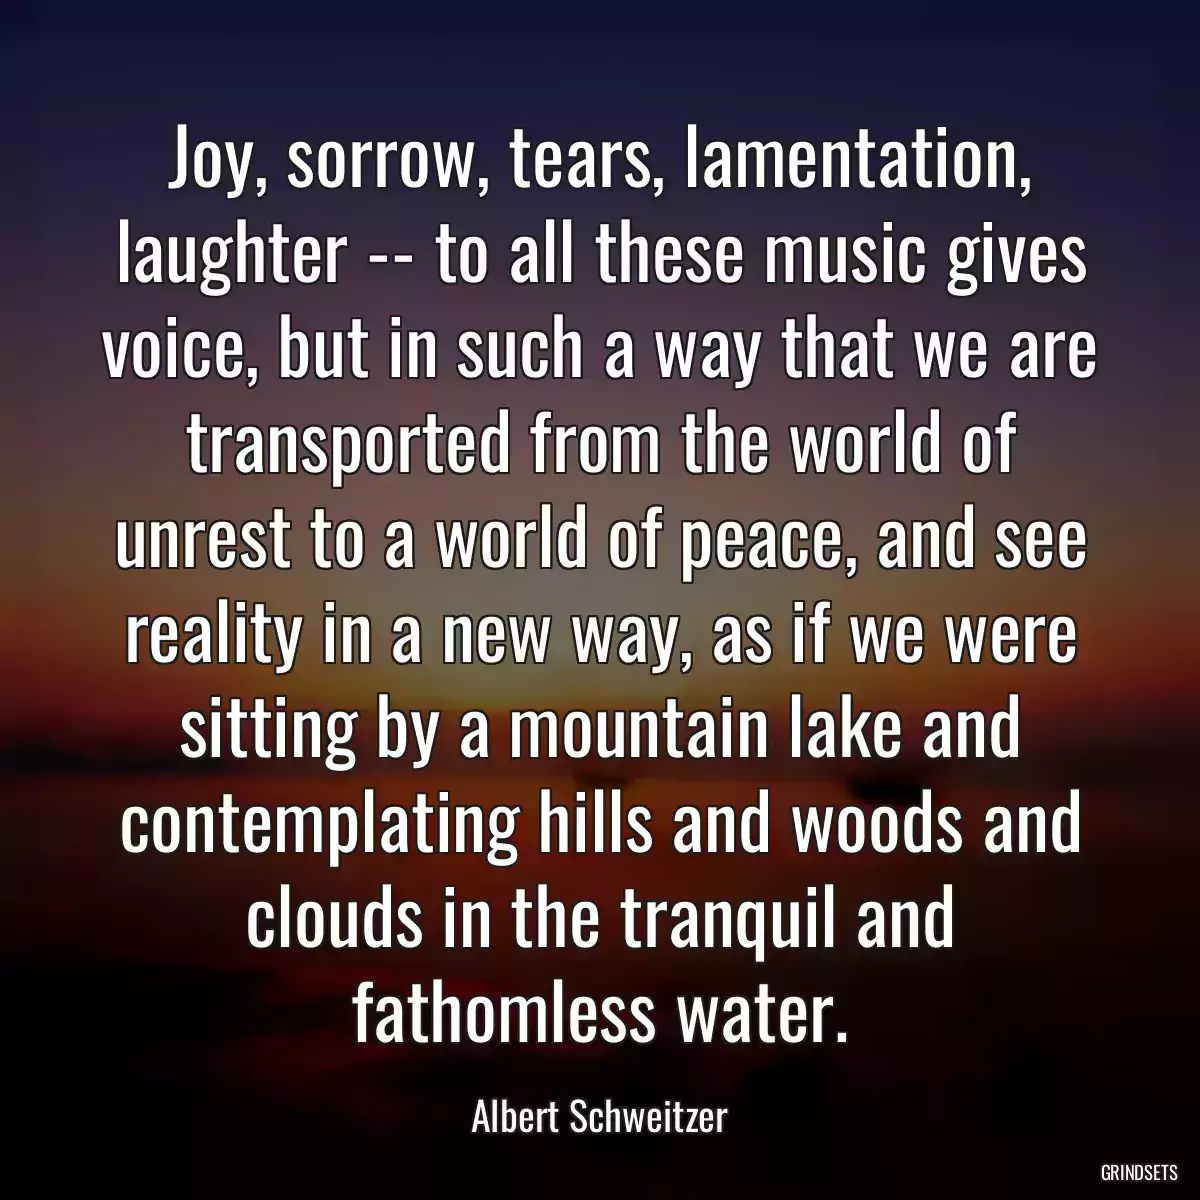 Joy, sorrow, tears, lamentation, laughter -- to all these music gives voice, but in such a way that we are transported from the world of unrest to a world of peace, and see reality in a new way, as if we were sitting by a mountain lake and contemplating hills and woods and clouds in the tranquil and fathomless water.